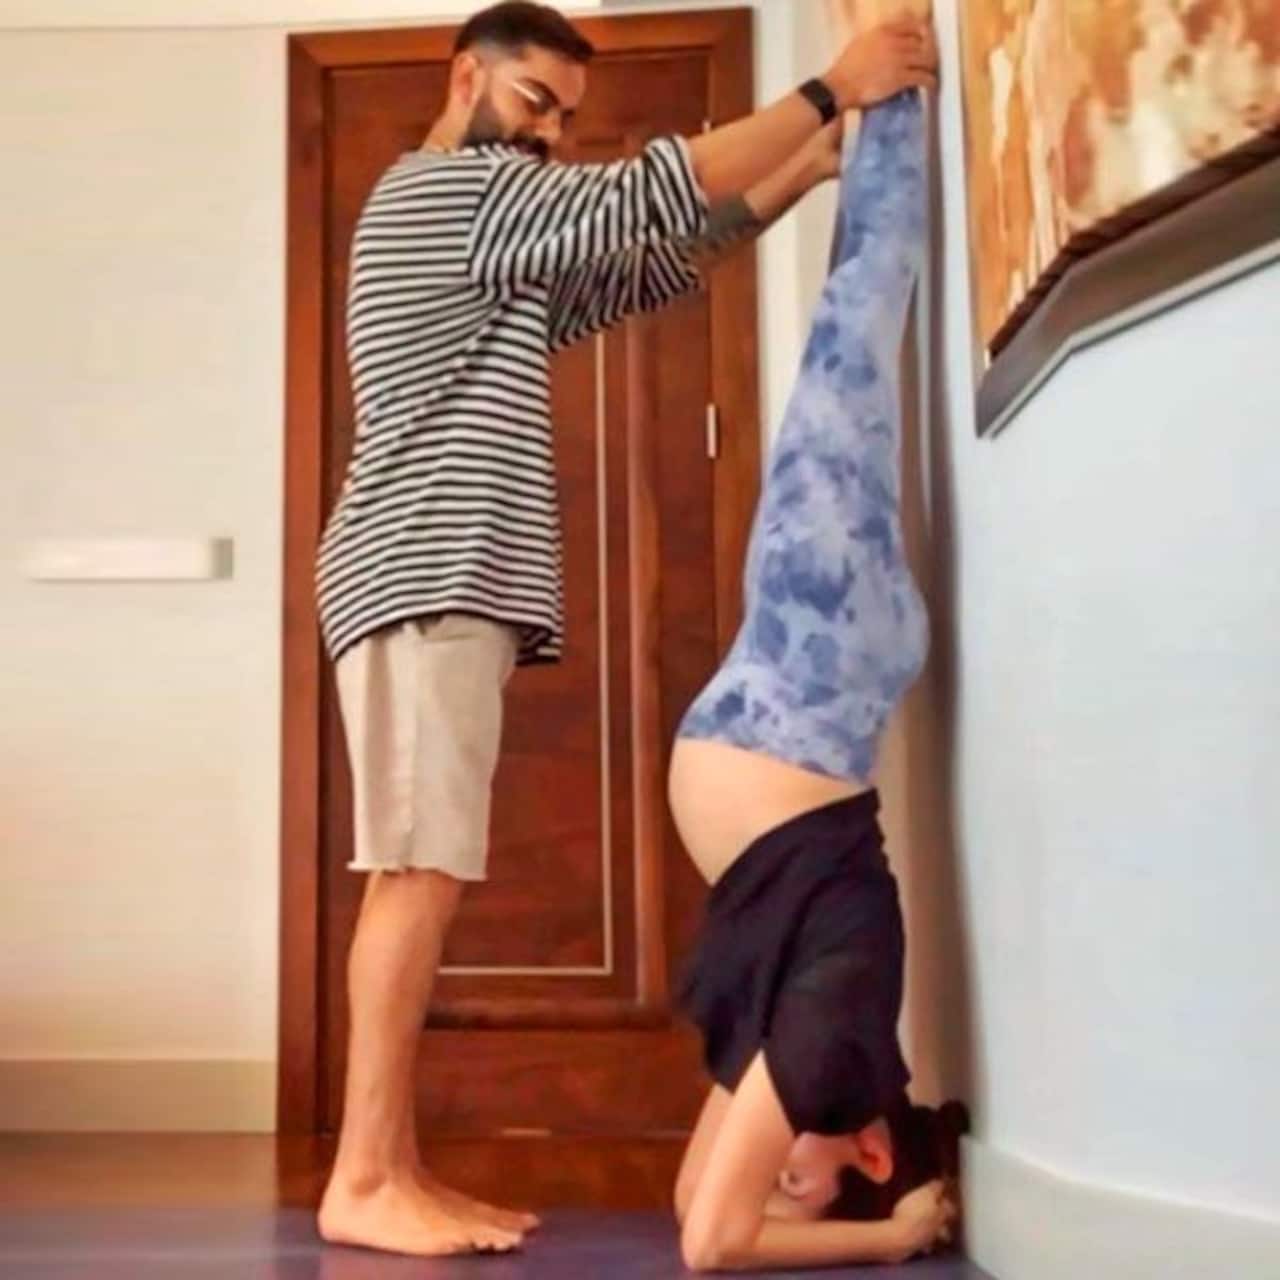 Pregnant Anushka Sharma performs headstand with hubby Virat Kohli’s support – see pic